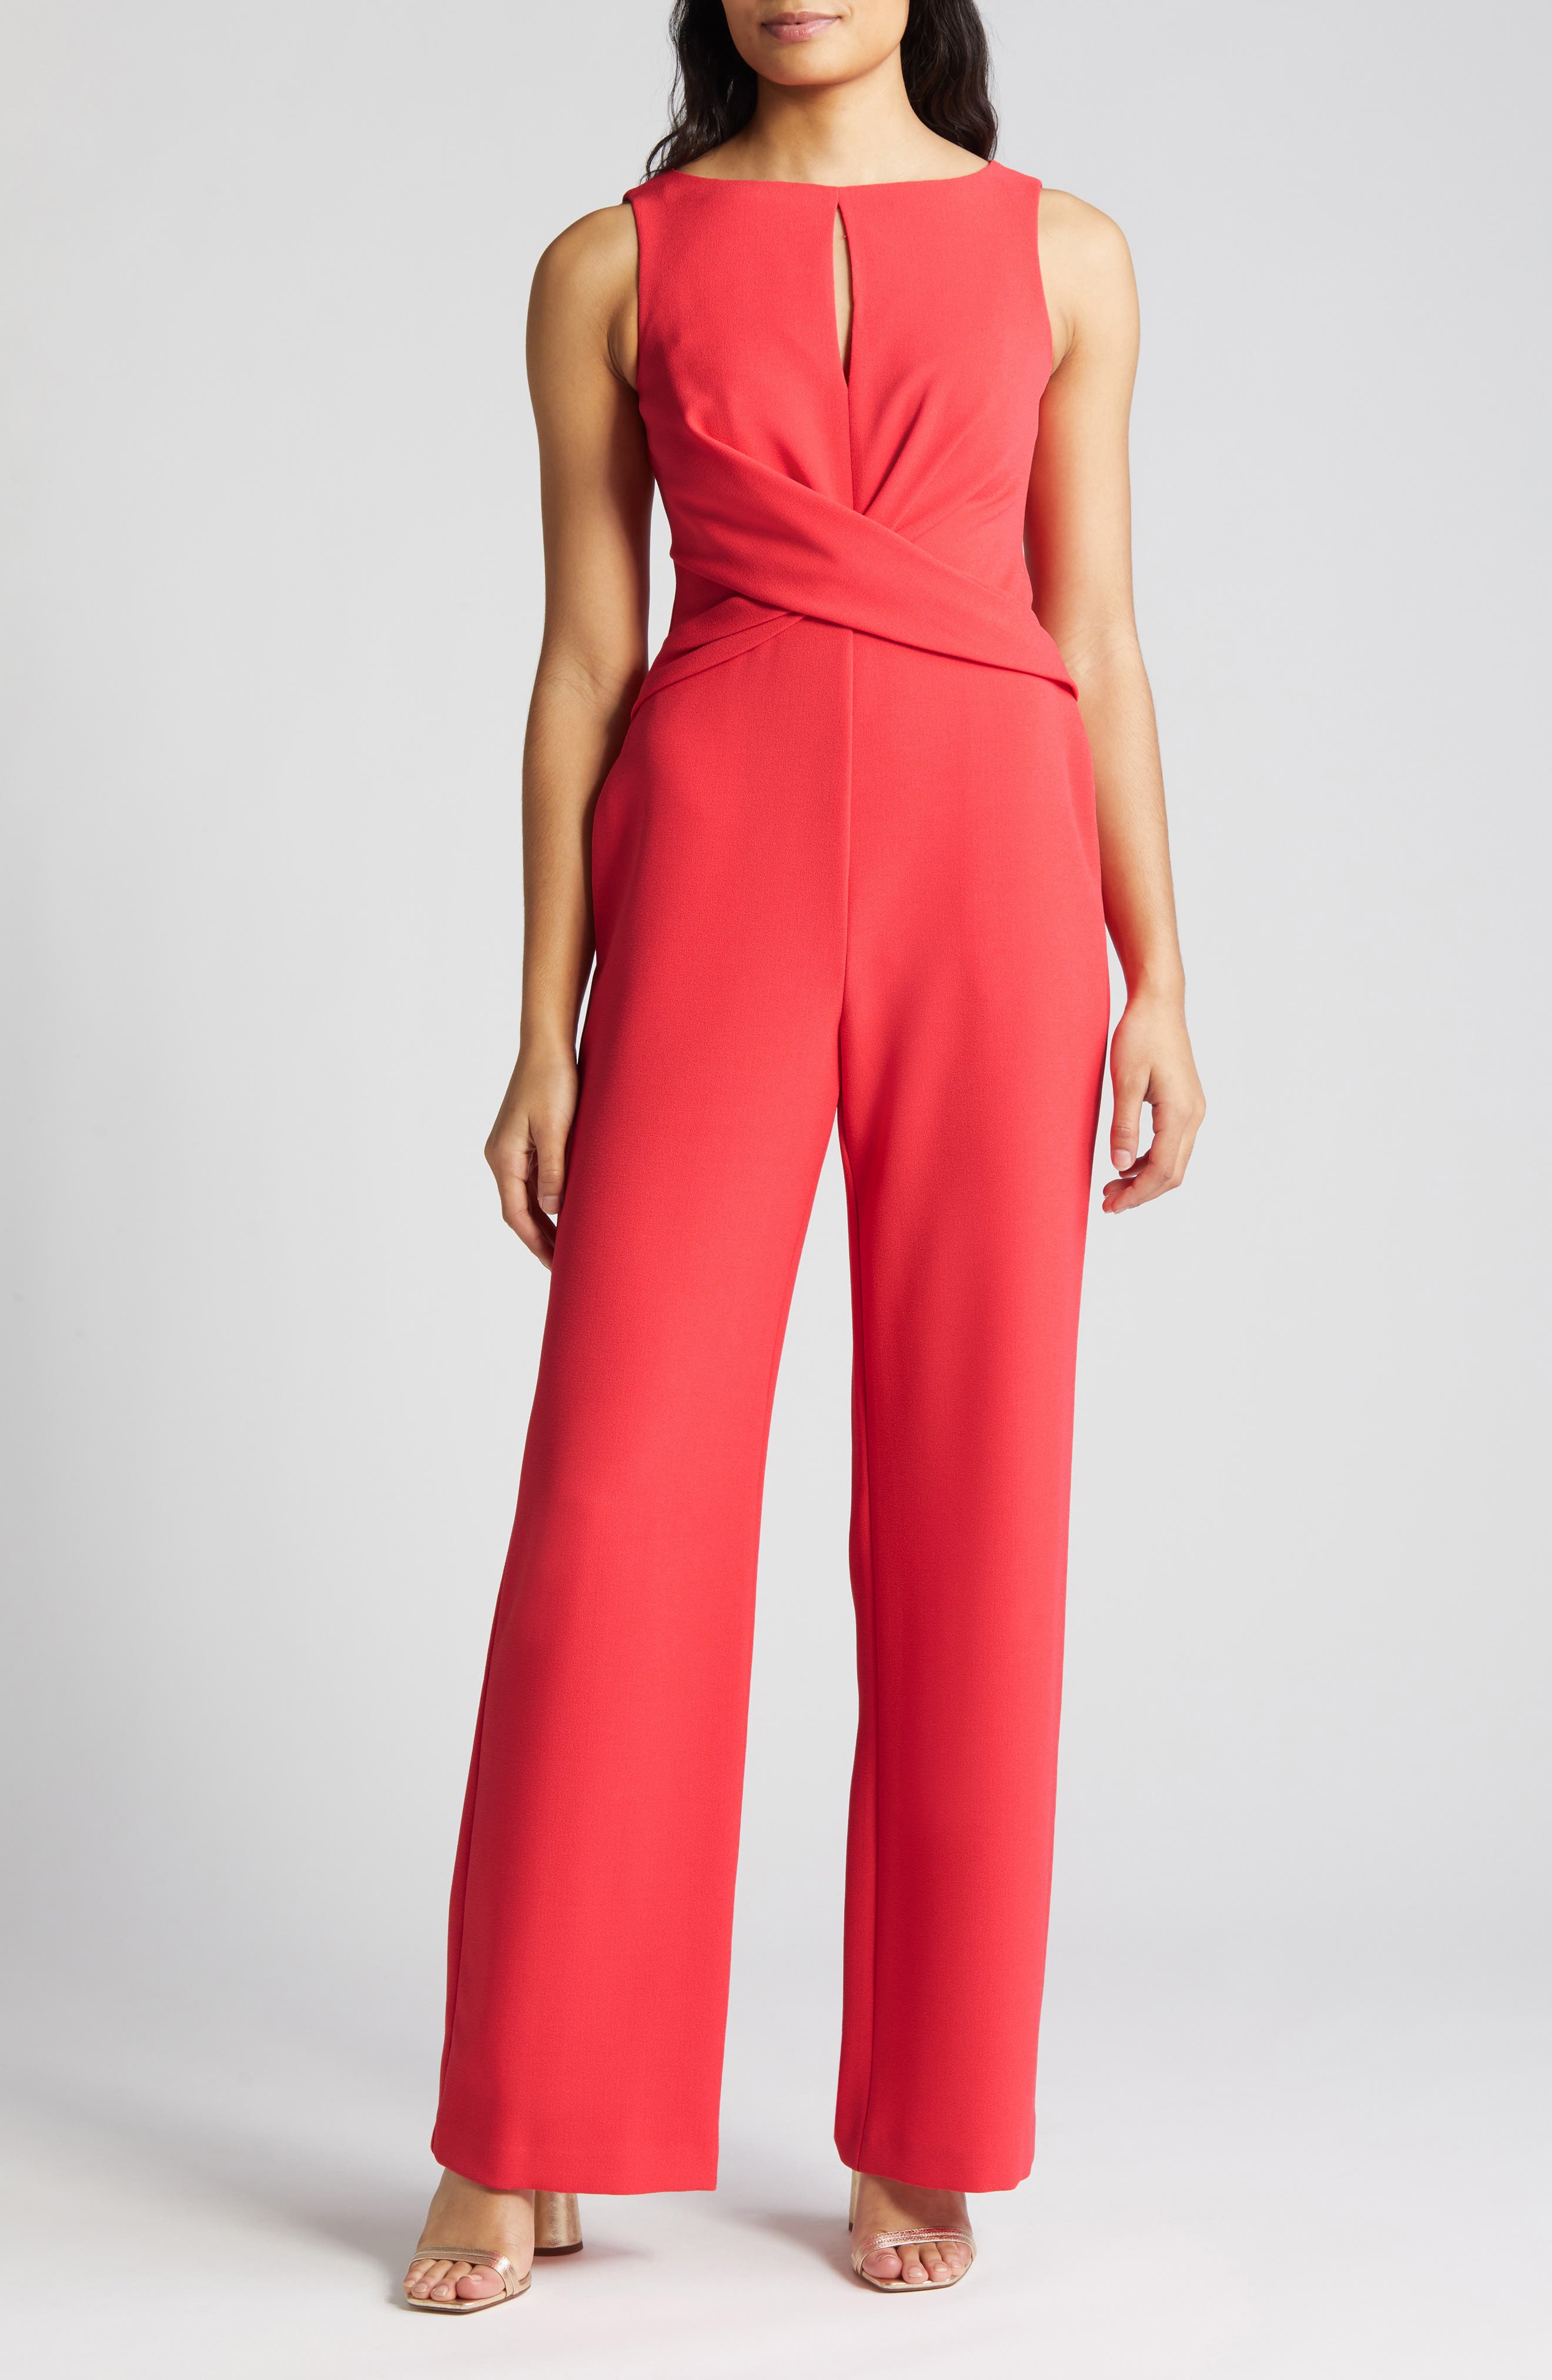 Vince Camuto Cross Front Keyhole Wide Leg Crepe Jumpsuit in Hot